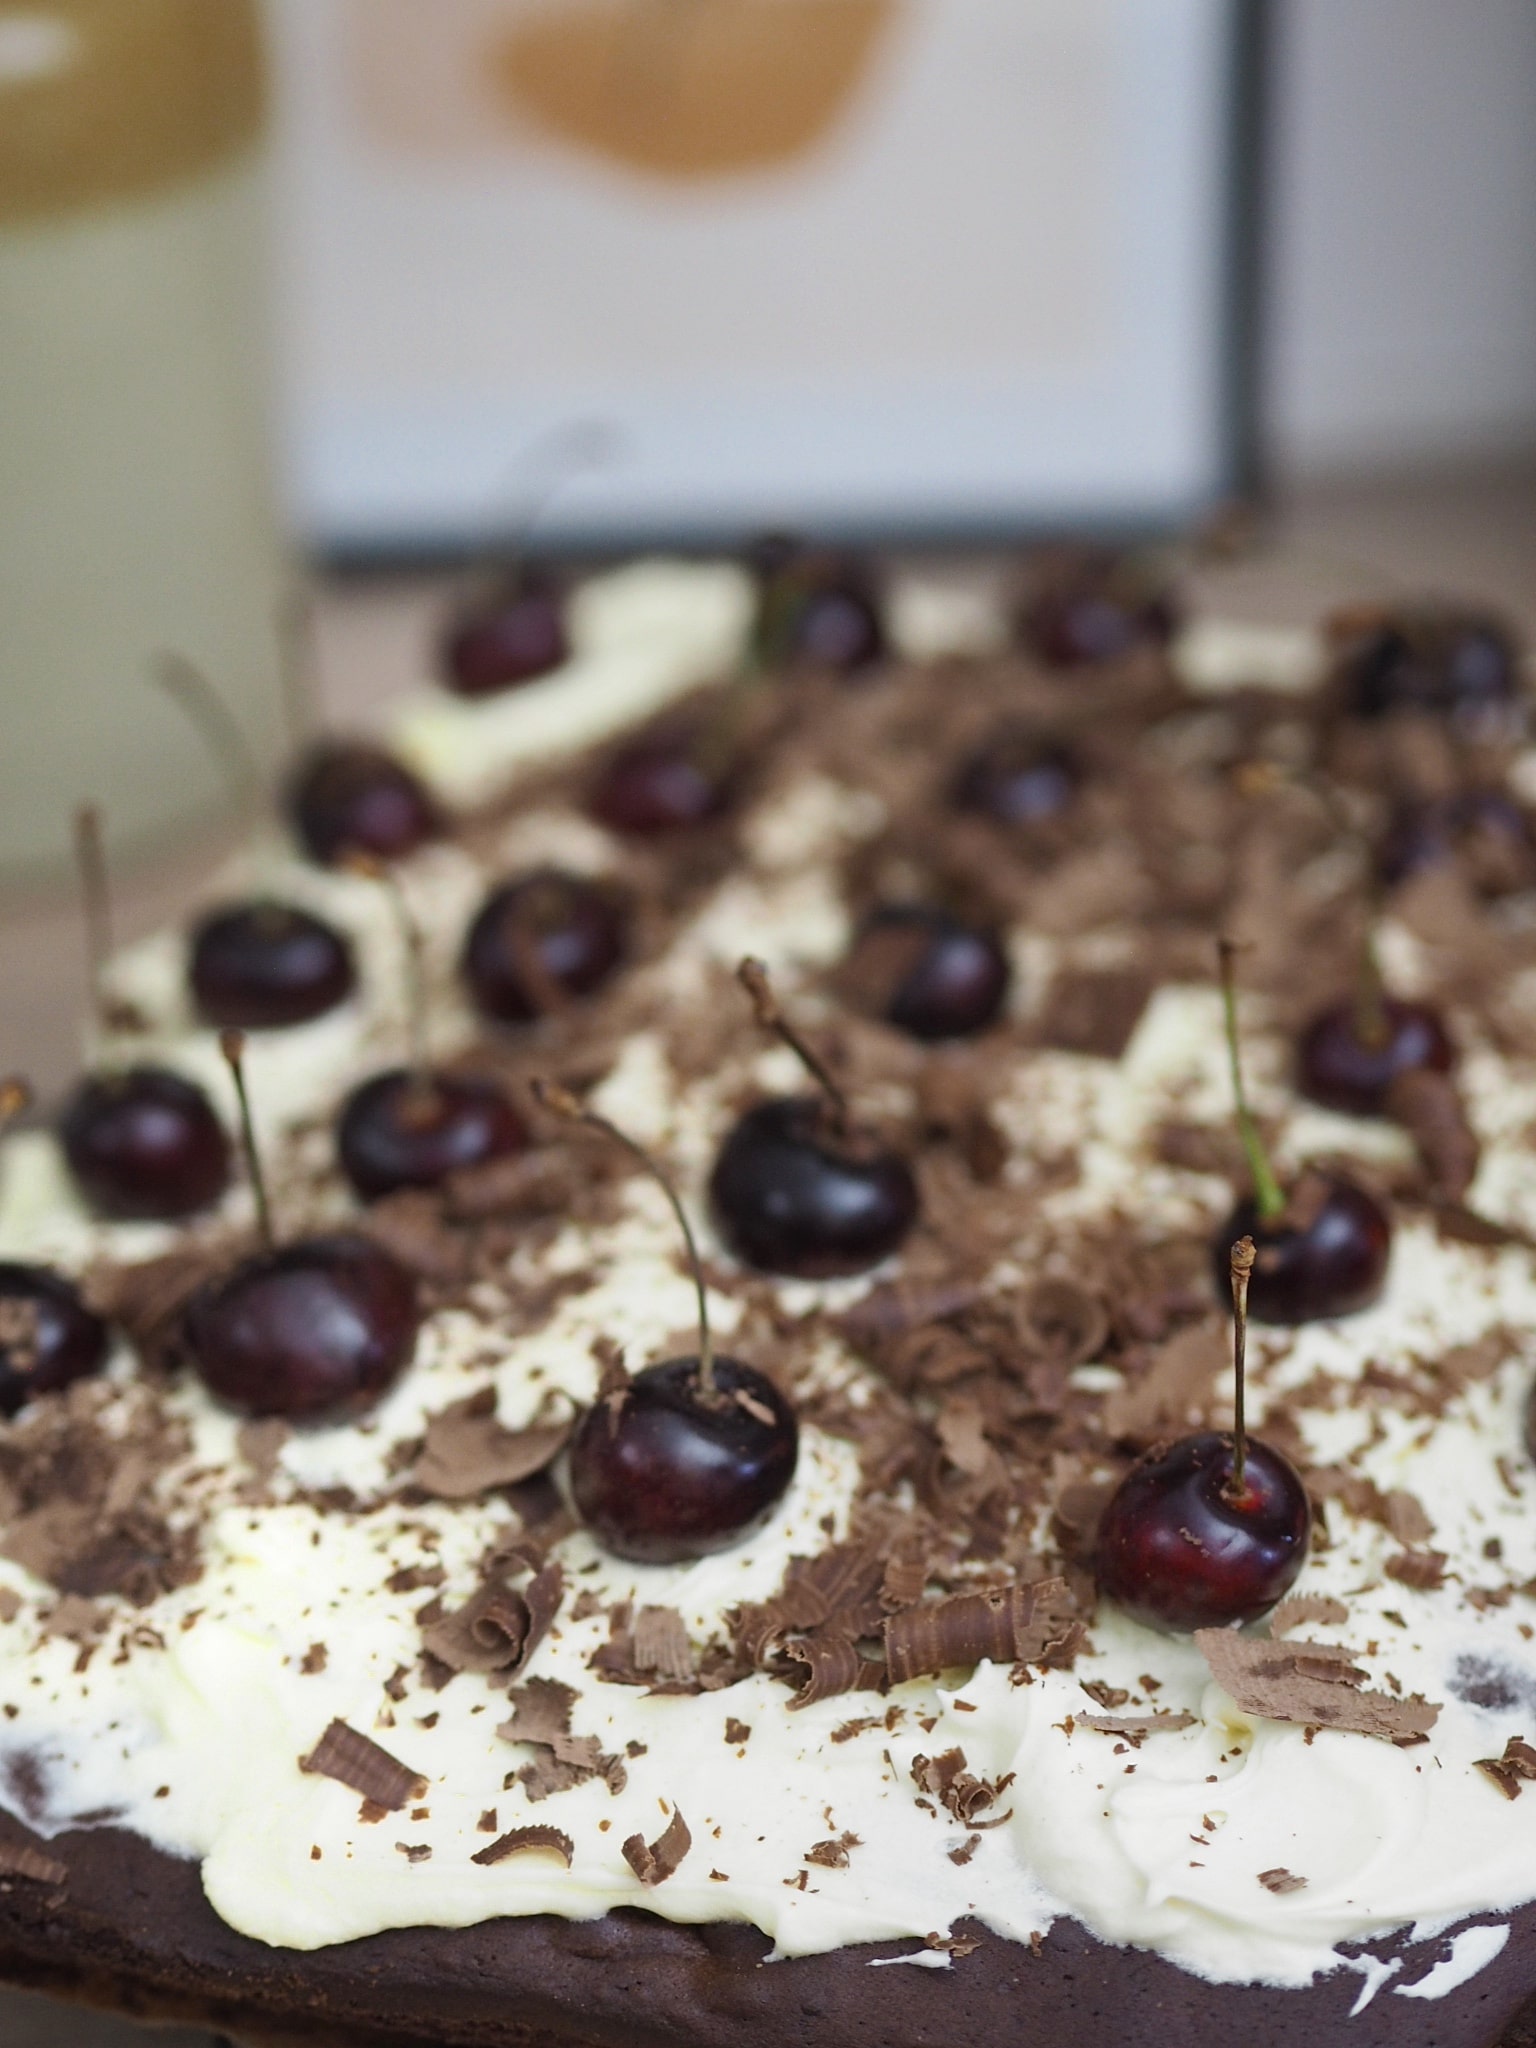 Simple recipe for baking a black forest cherry tray bake sponge. Easy recipe for beginners, perfect for winter and Christmas party desserts